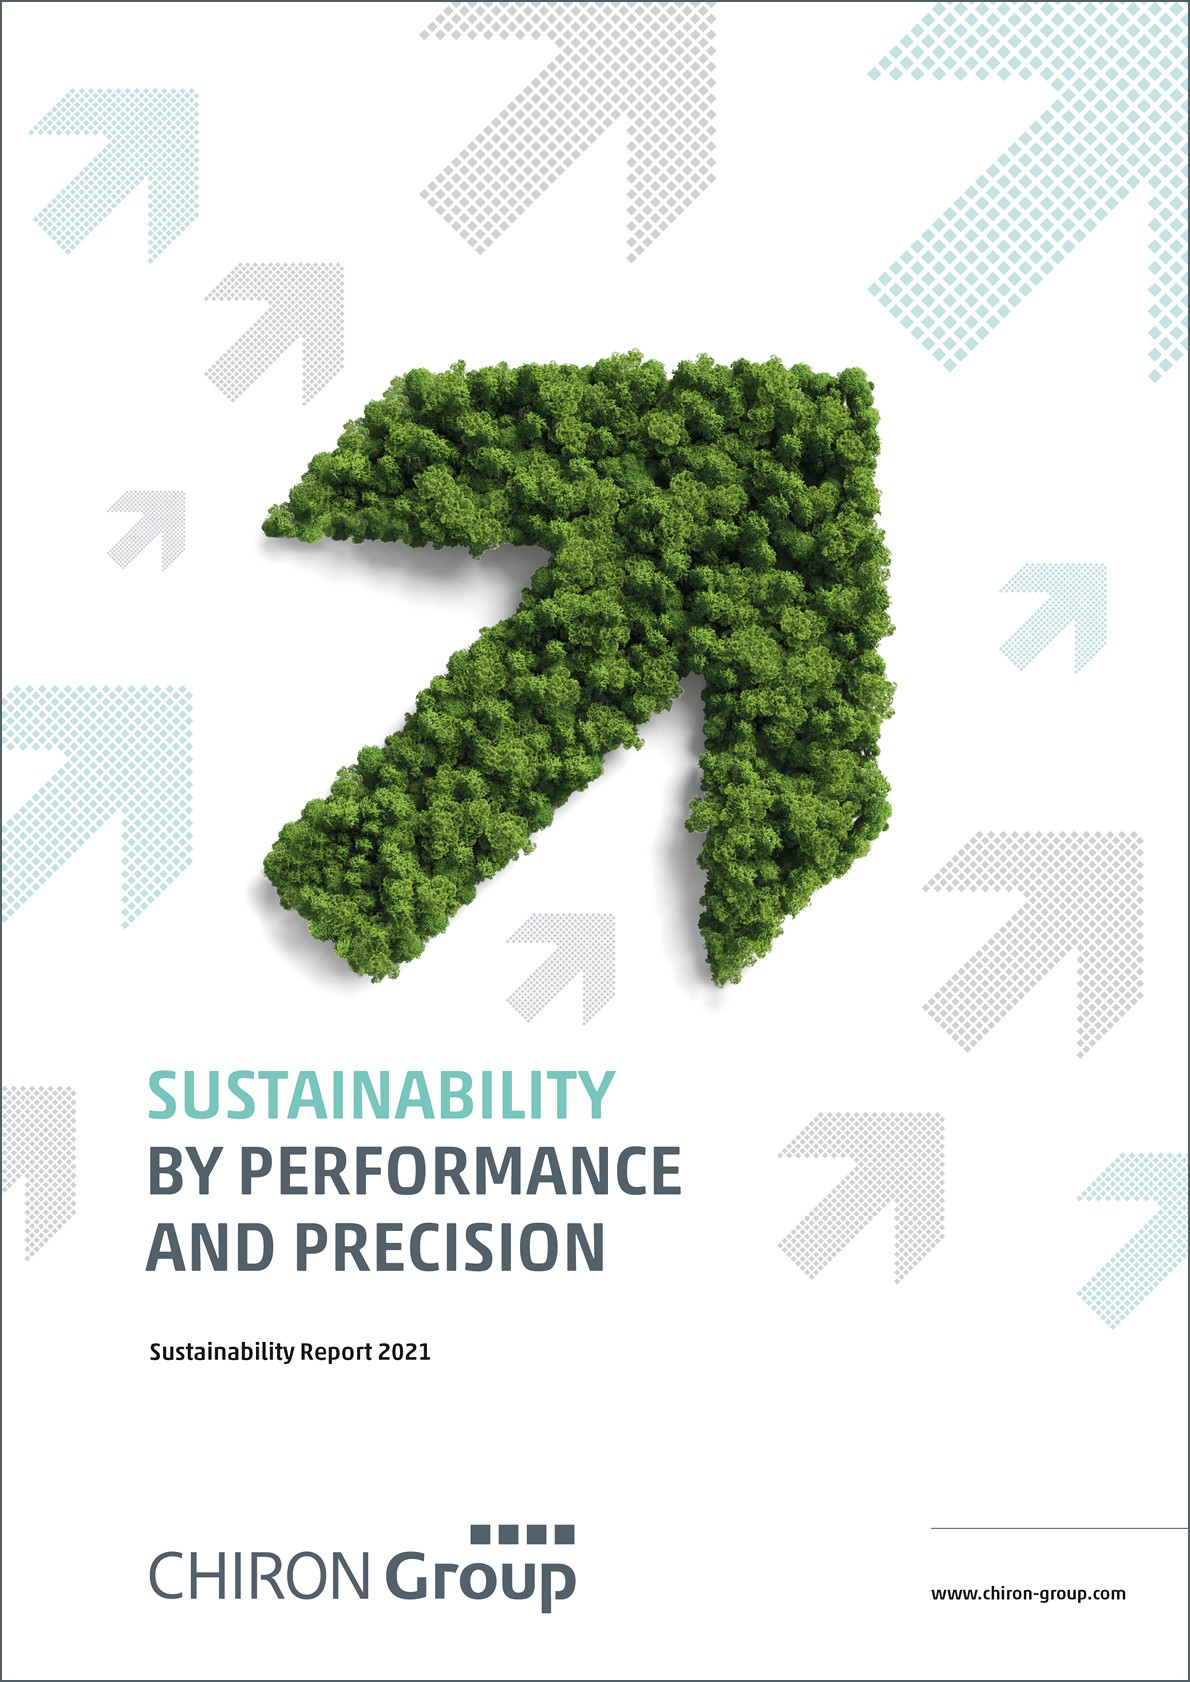 The sustainability report published by the CHIRON Group demonstrates from the upwards arrows over the title alone just how ambitious the company's goals are.